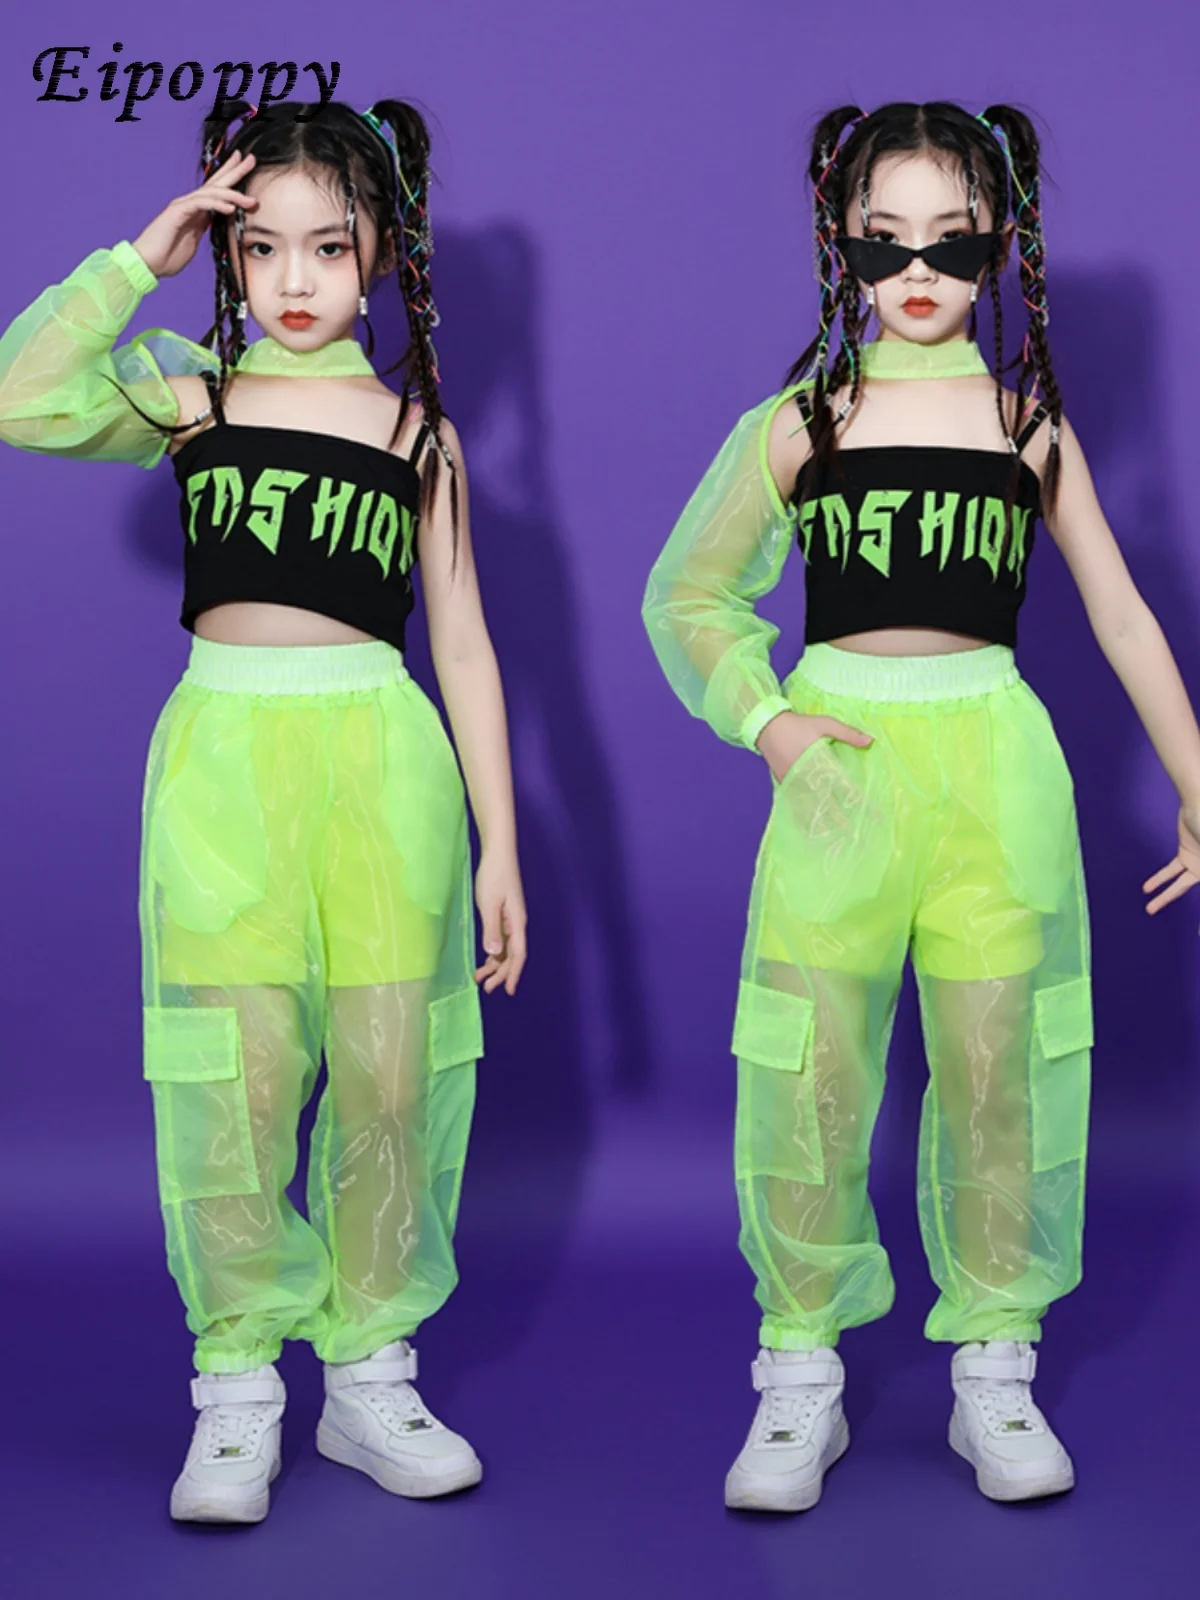 

Girls' Jazz Dance Hip Hop Trendy Clothes Fashion Cropped Tank Top Sheer Mesh Trousers Children's Catwalk Show Performance